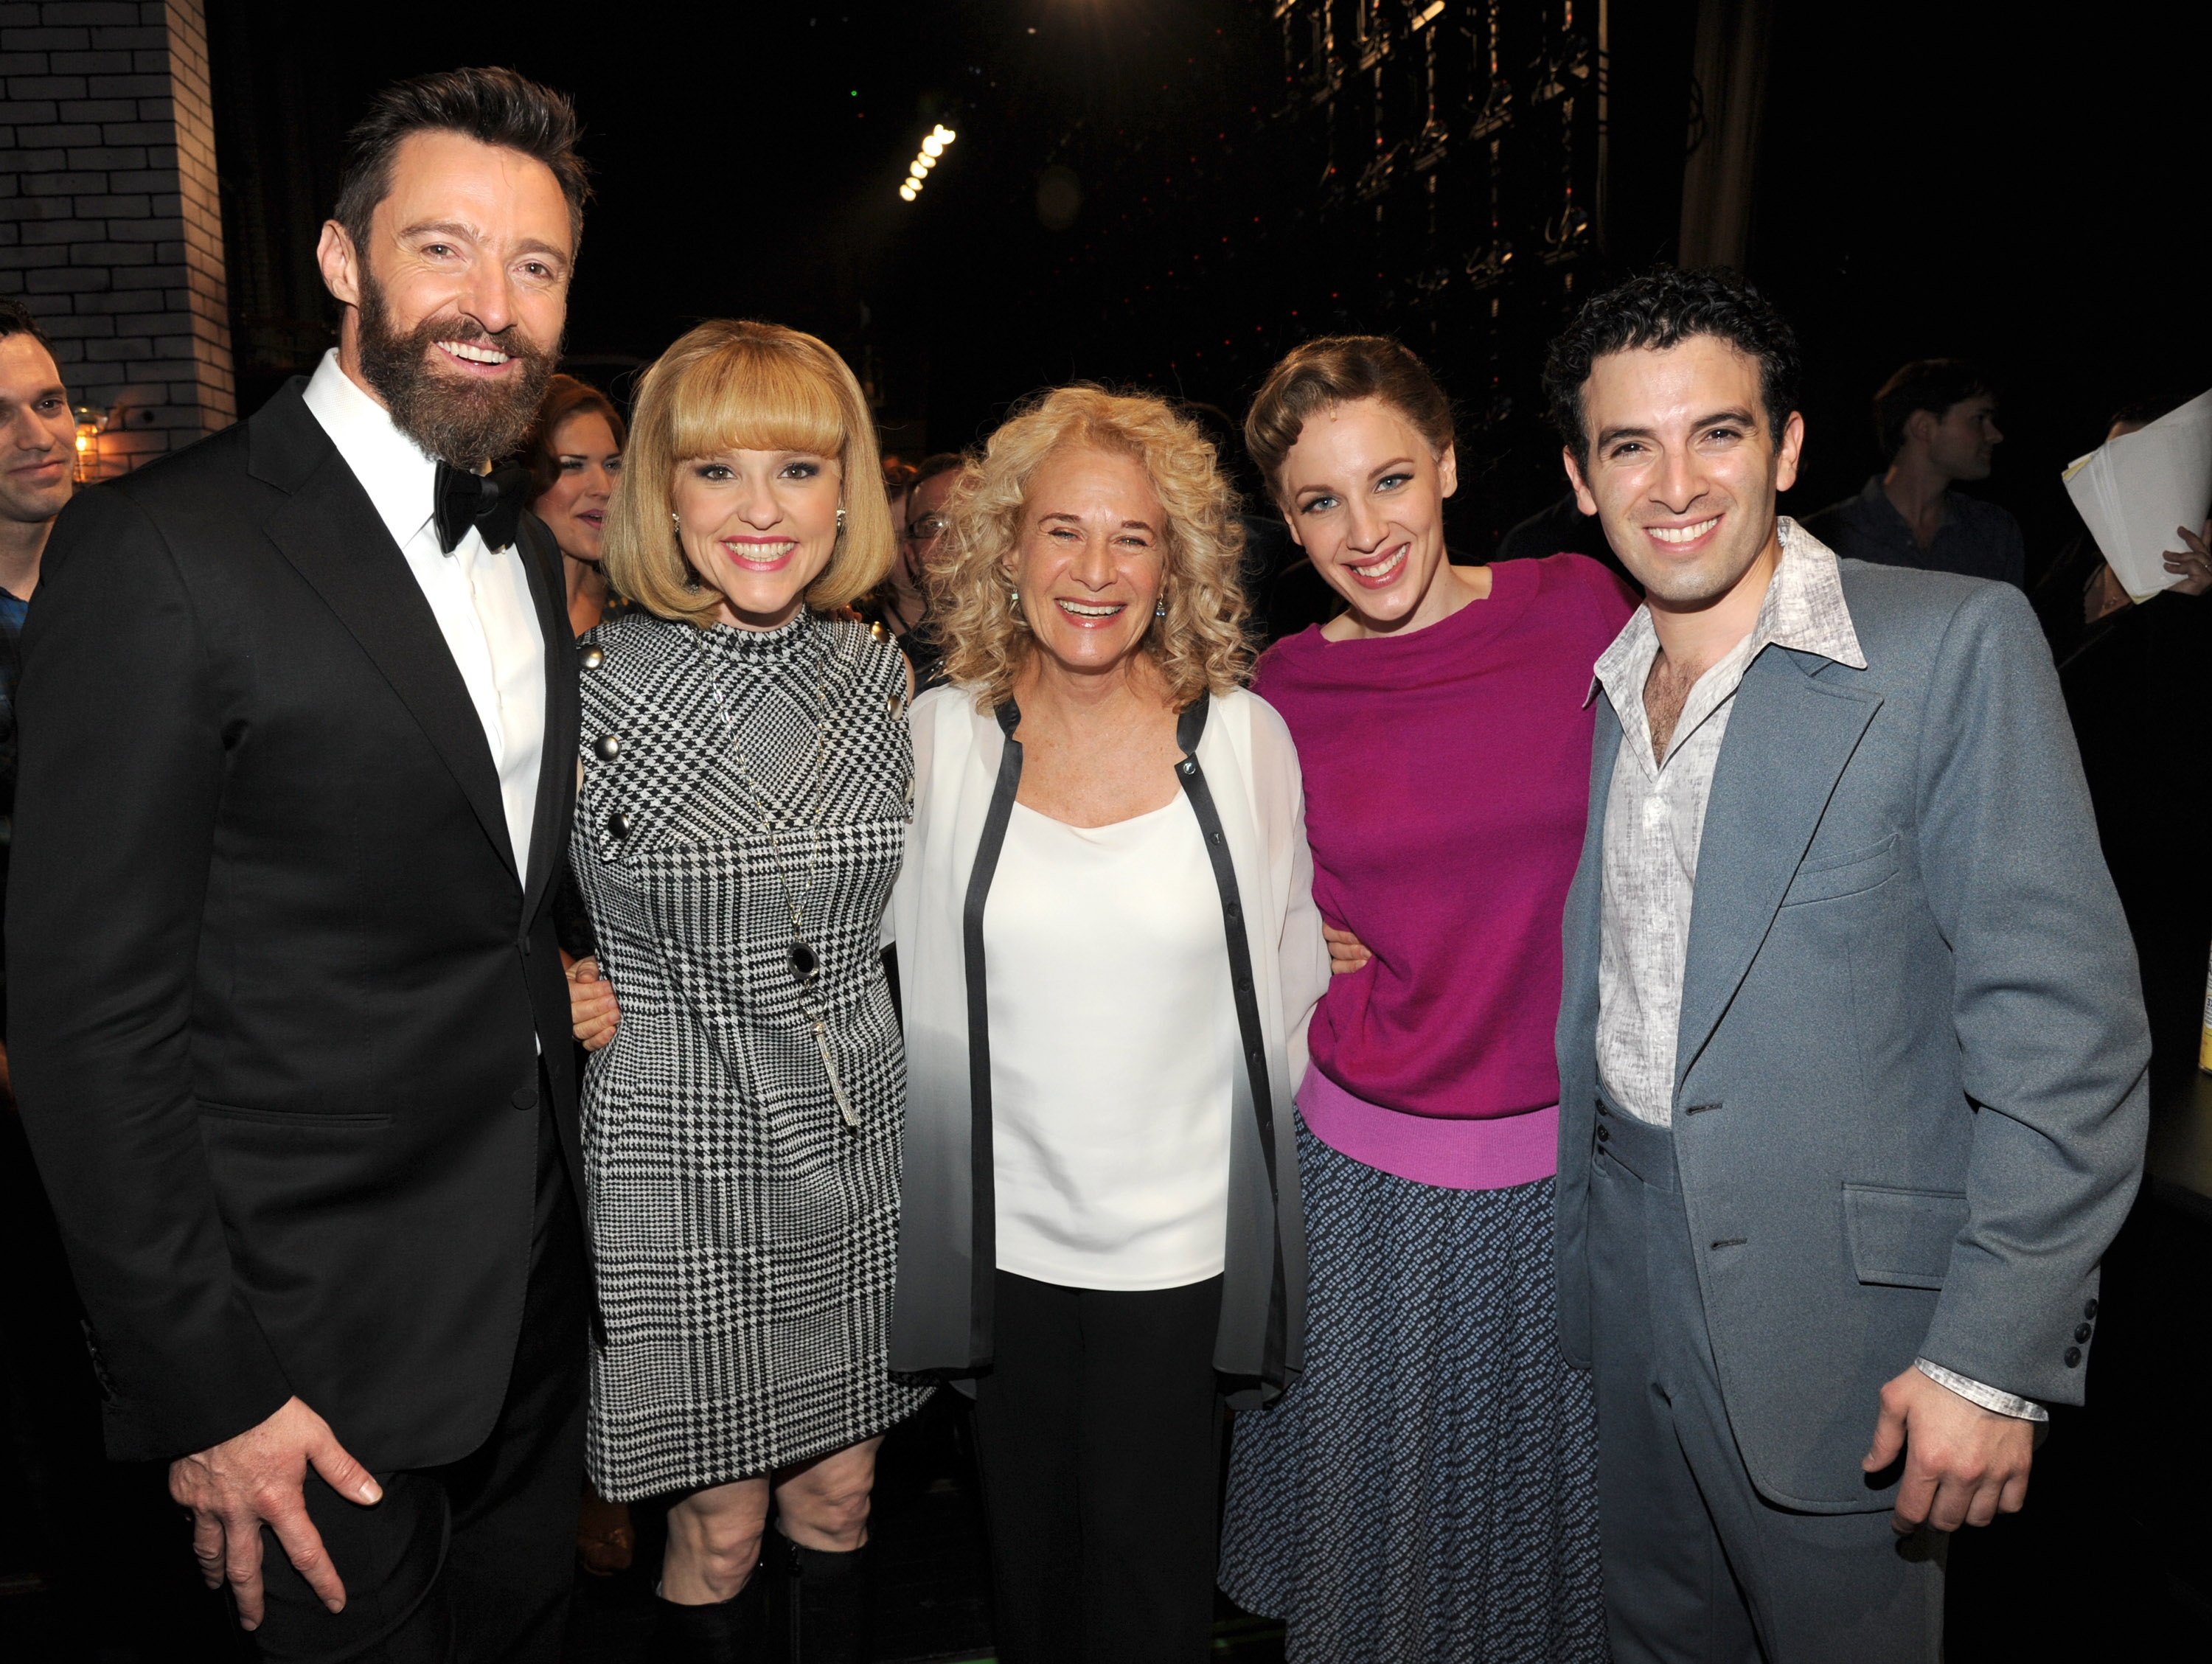 Jarrod Spector with Hugh Jackman, Jessie Mueller and Carole King at the 68th Annual Tony Awards